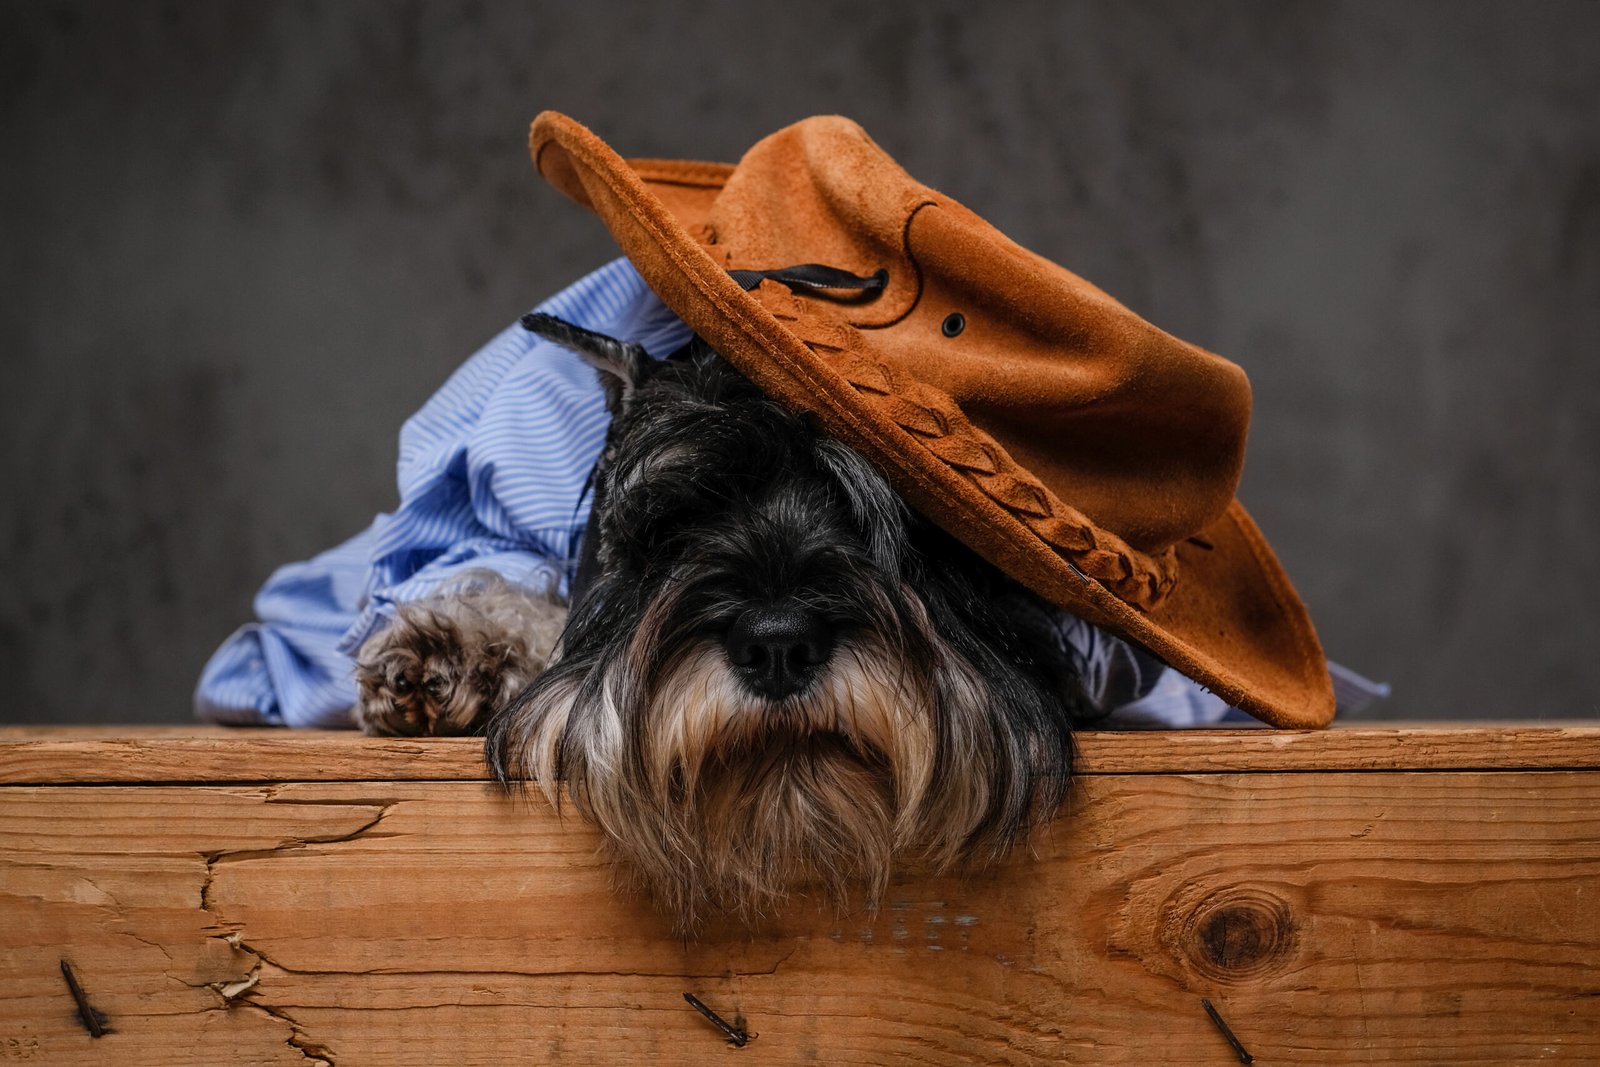 Bored Scottish terrier wearing a blue shirt and hat lying on a wooden pallet